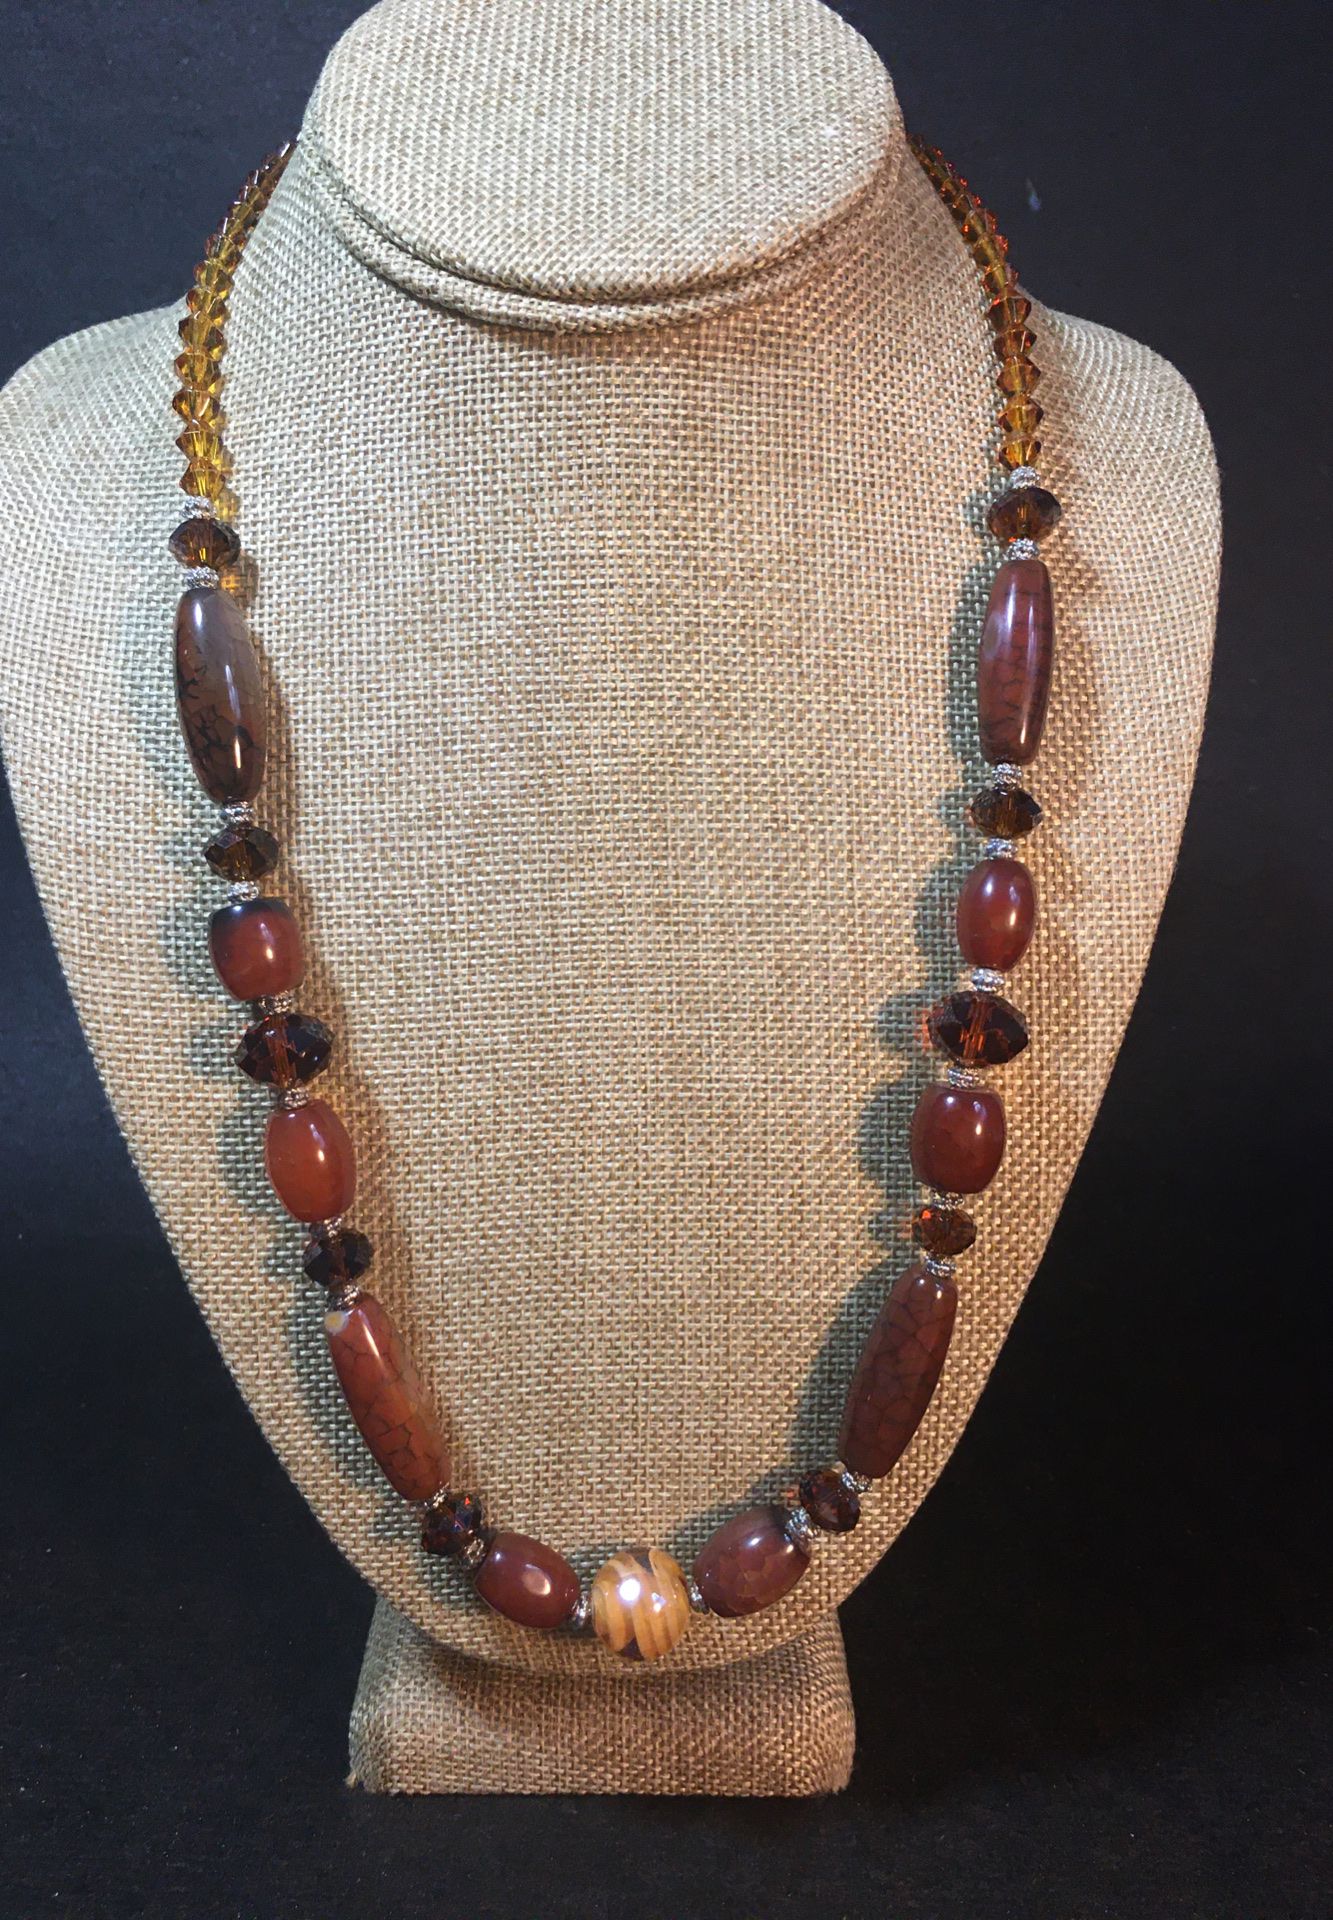 Genuine Stone Necklace w/Amber Colored Crystal Beads- Top Quality & Beautiful Craftsmanship- Like New Condition- Listing Hundreds Of Items